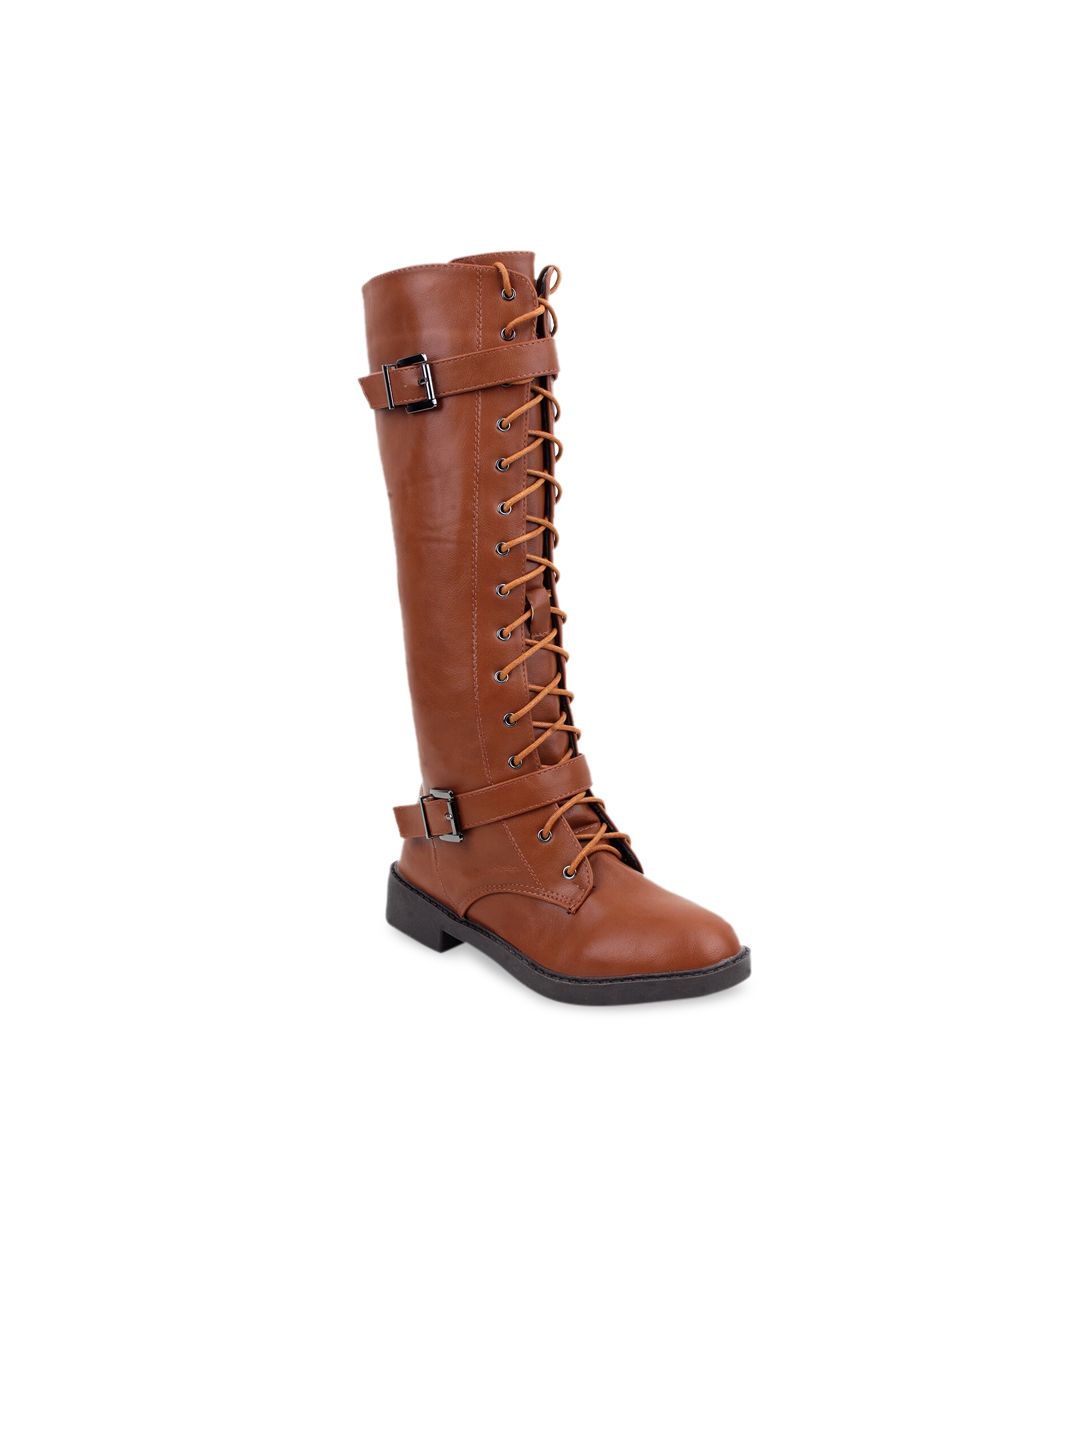 MSC Women Tan Solid Heeled Boots Price in India